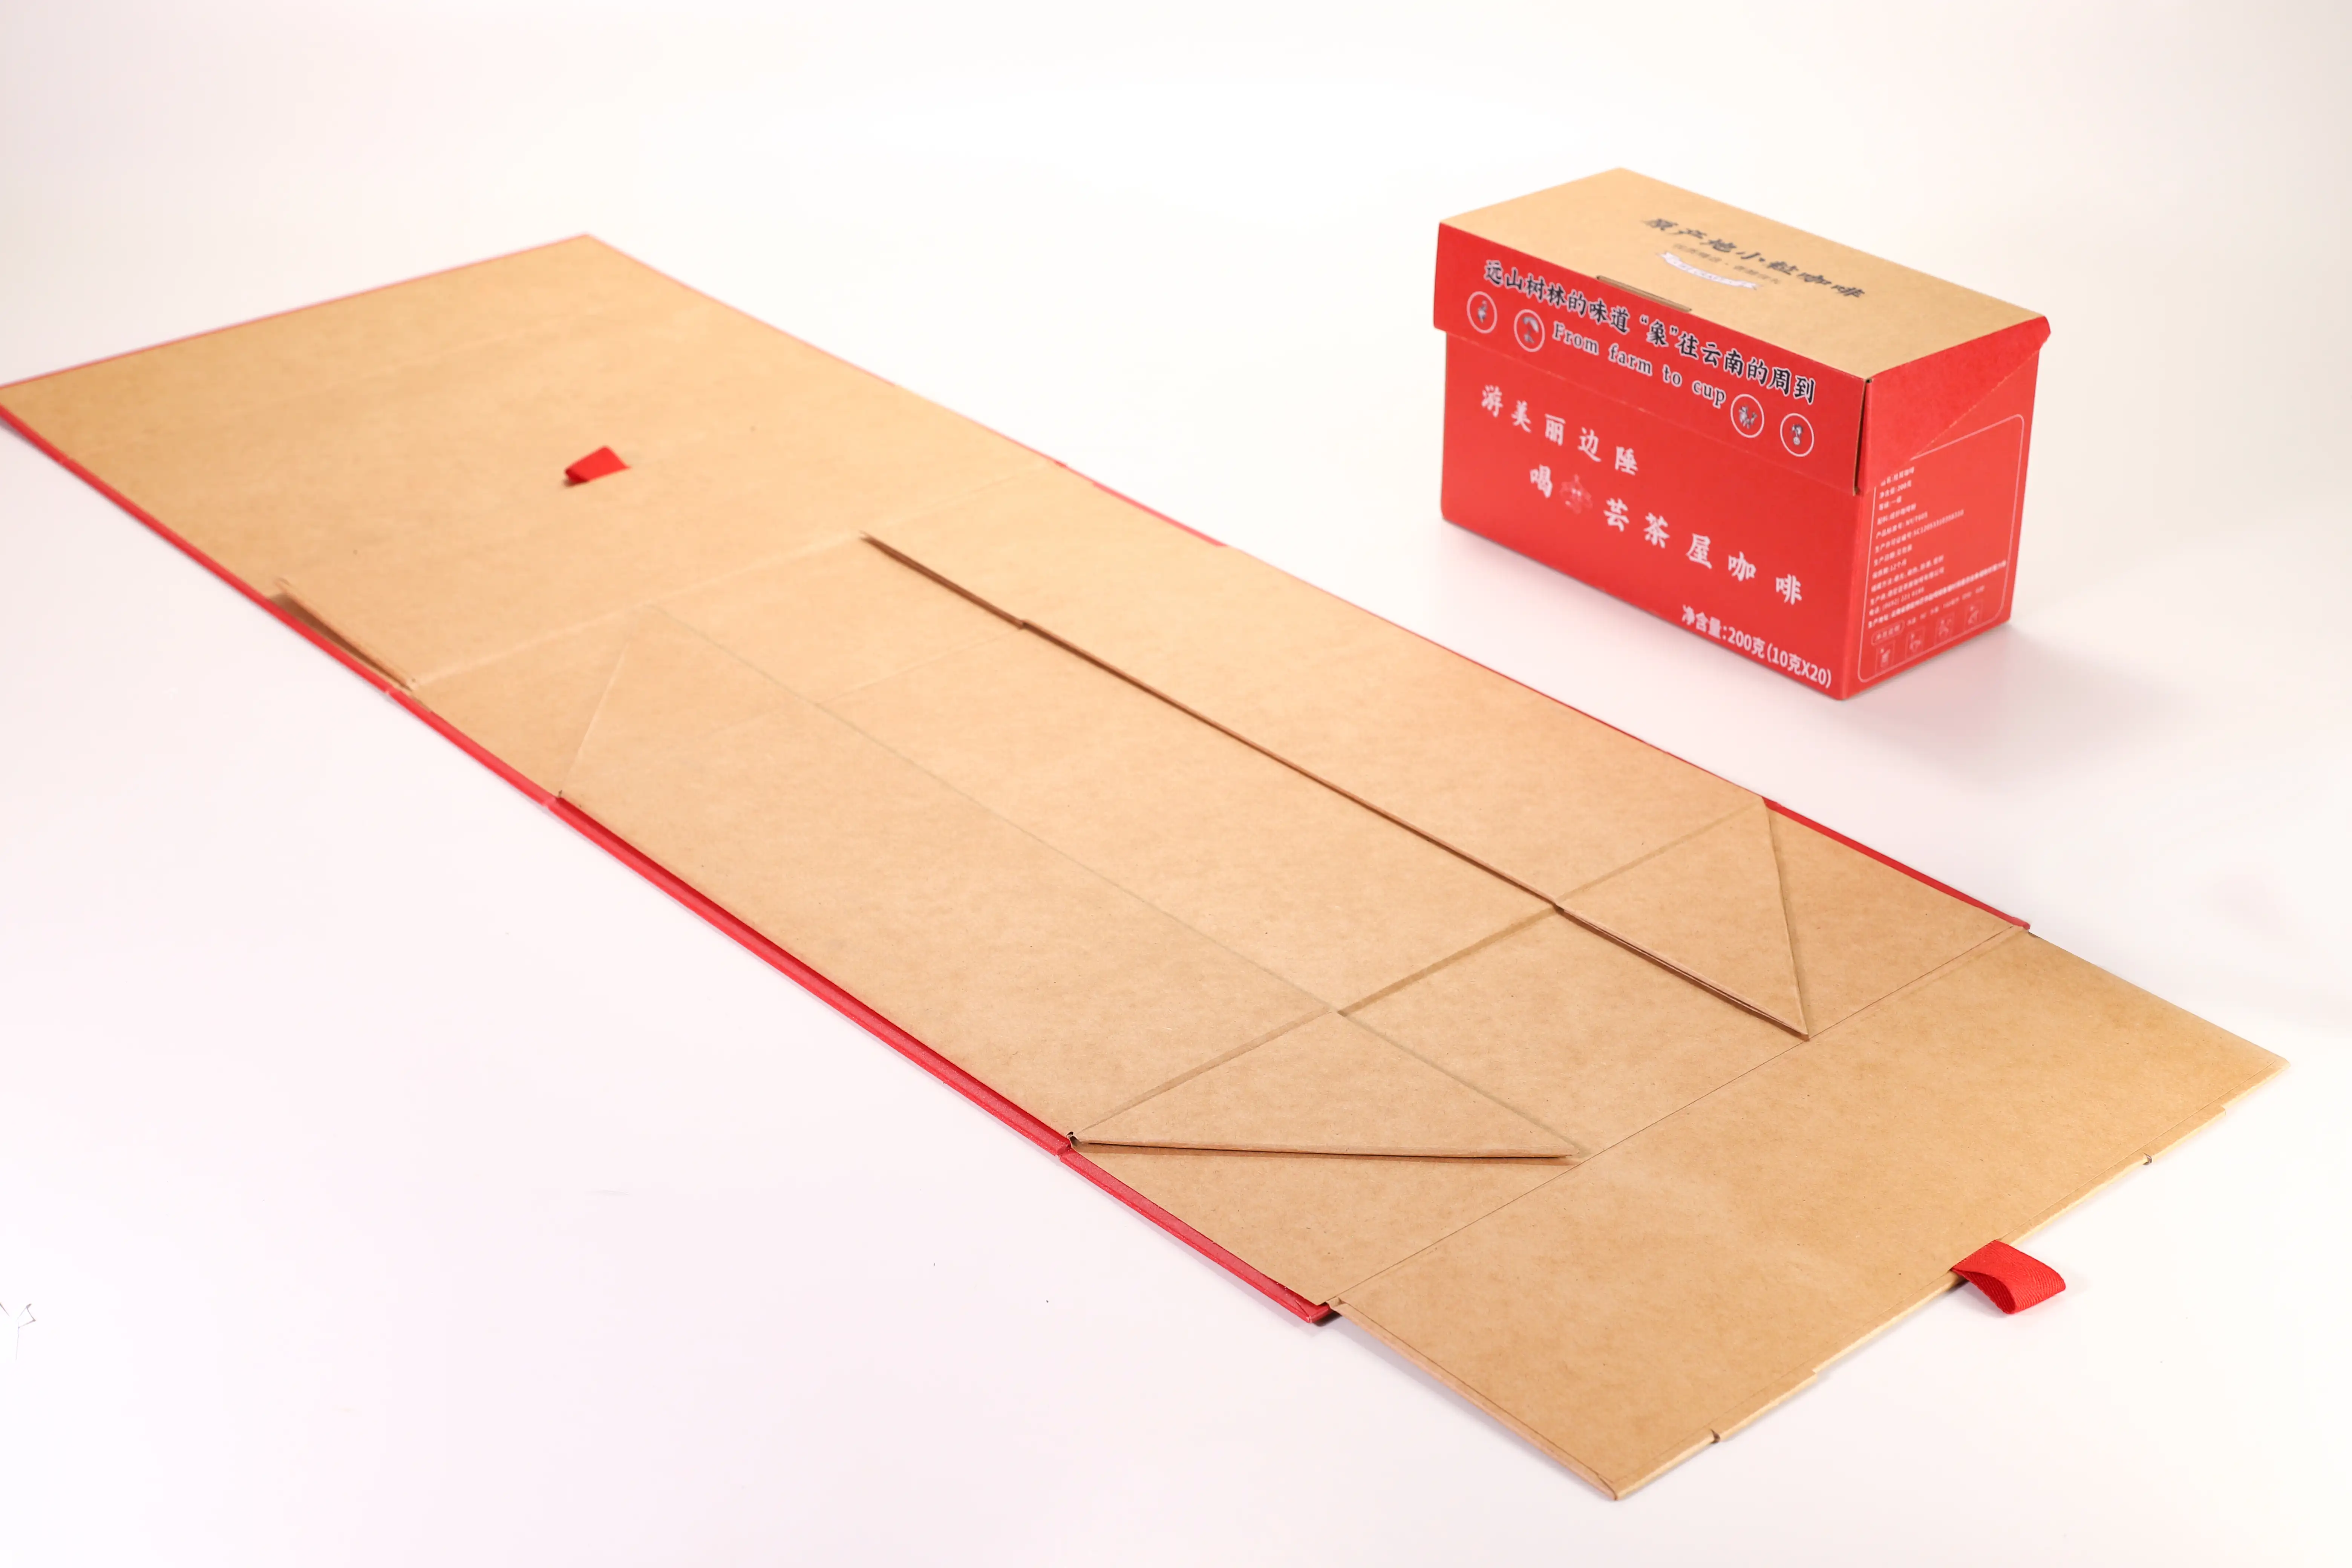 Custom Box Set Packaging: Elevate Your Product's Value & Brand Awareness